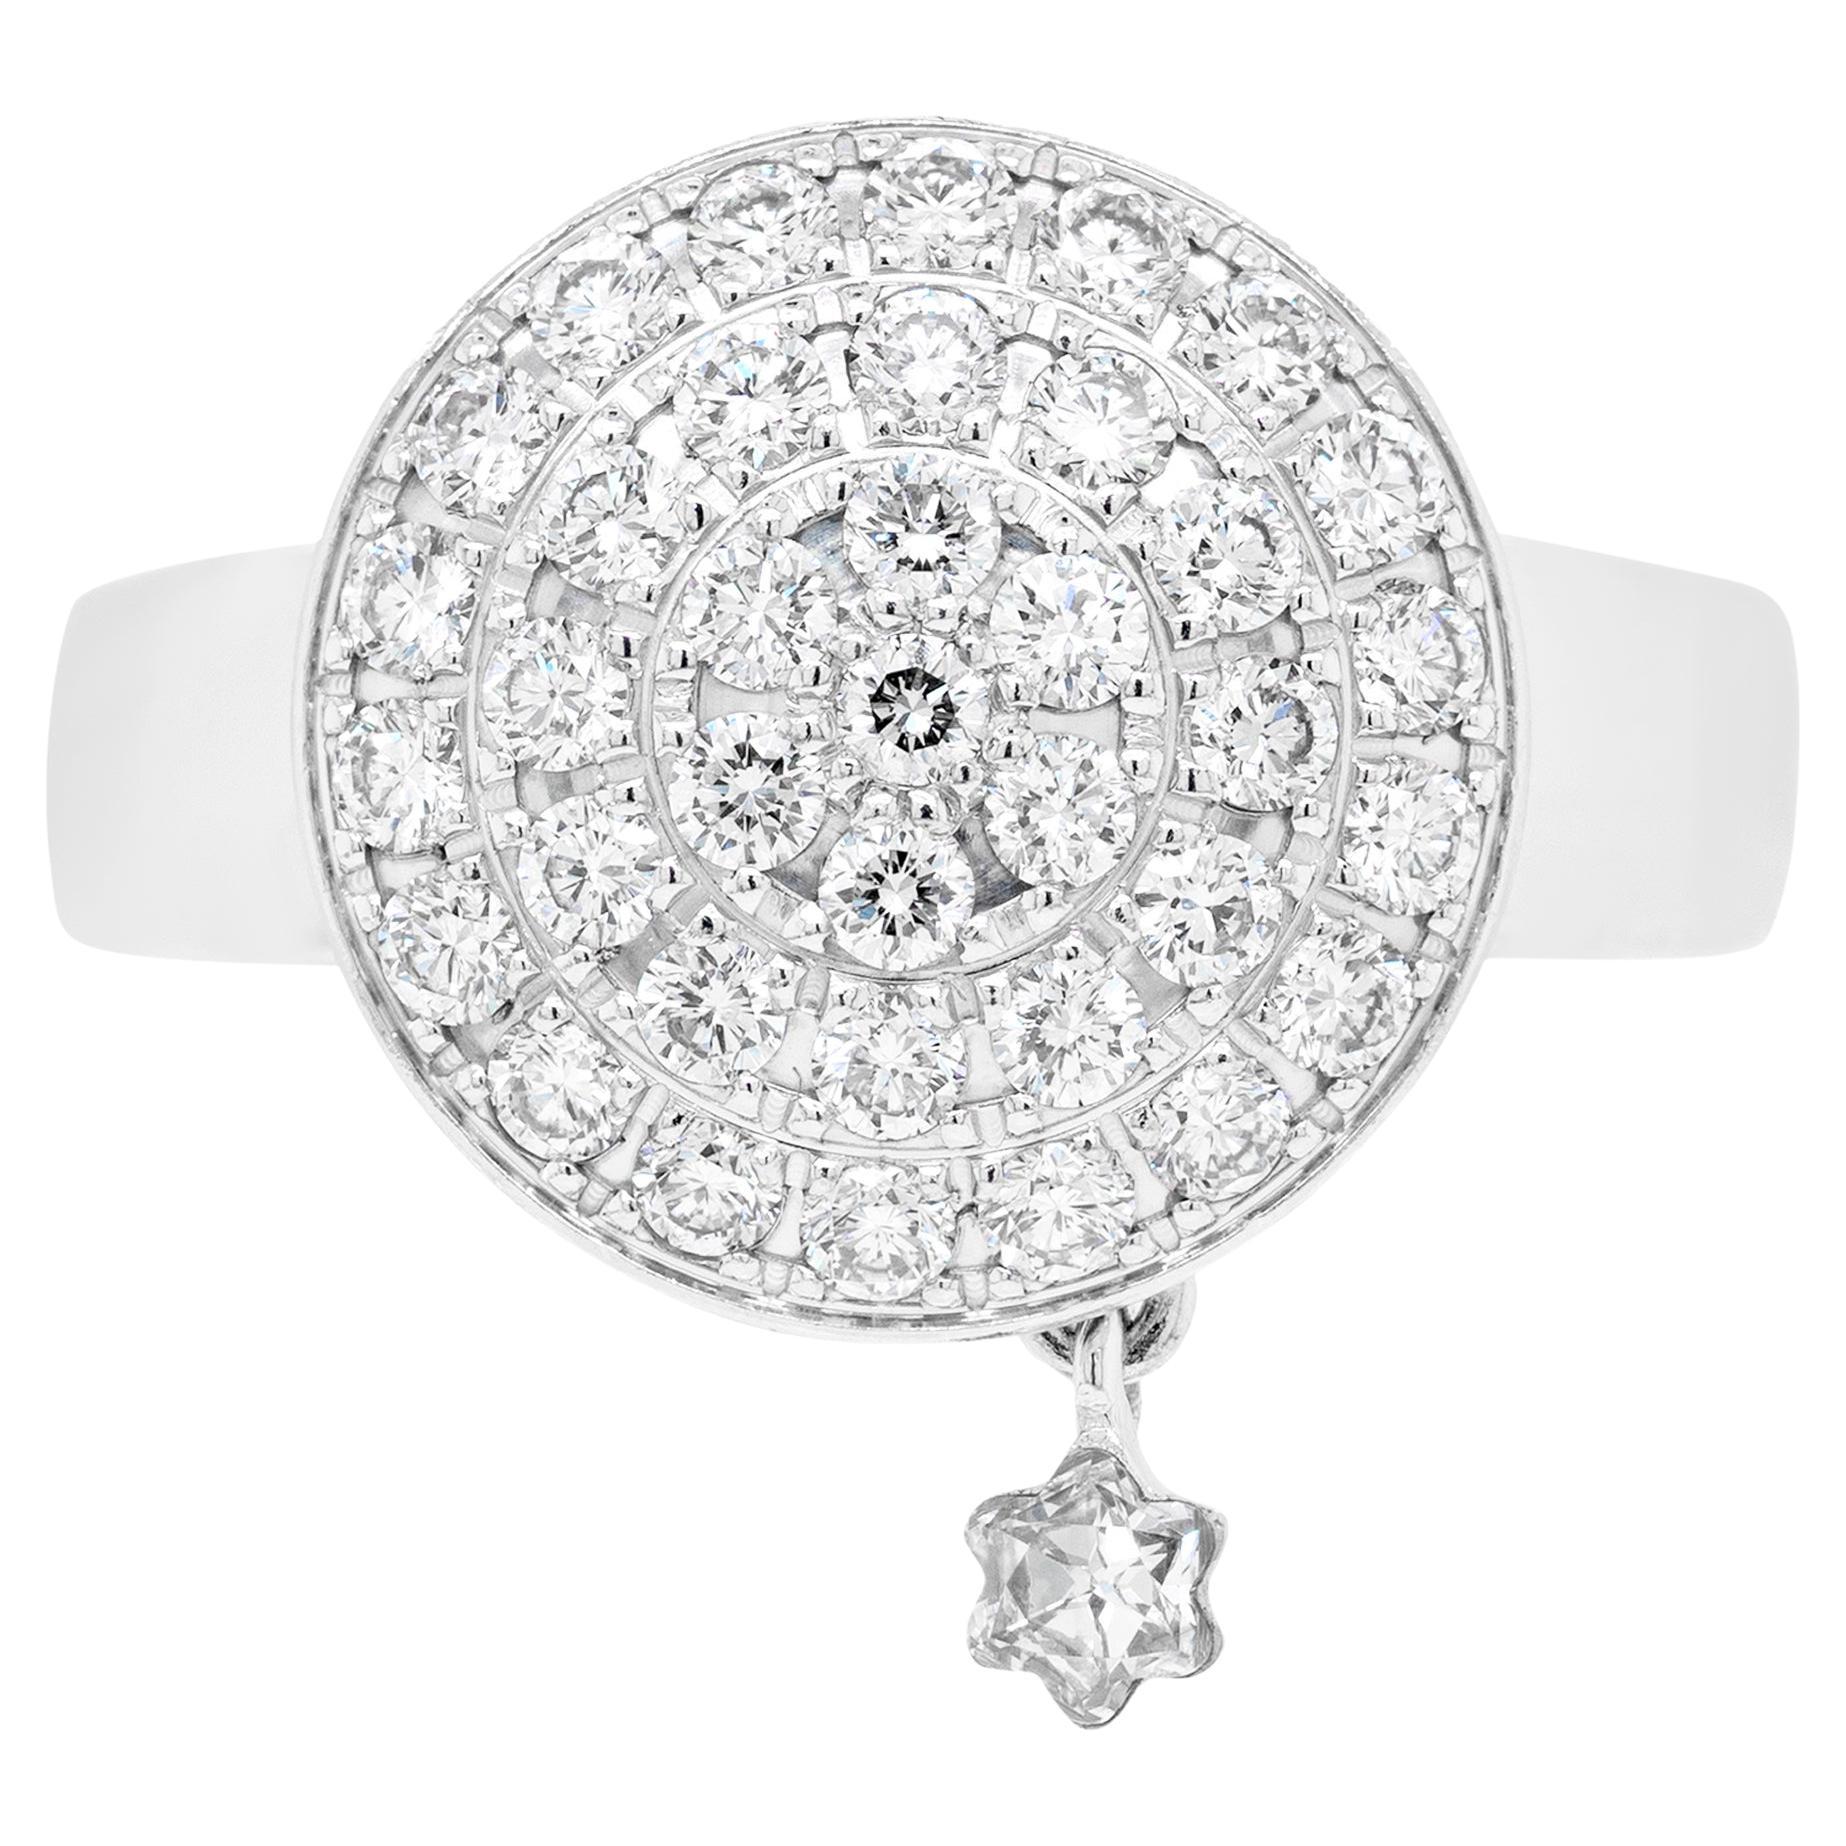  Montblanc 'La Dame Blanche' Diamond 18 Carat White Gold Cluster Dress Ring For Sale